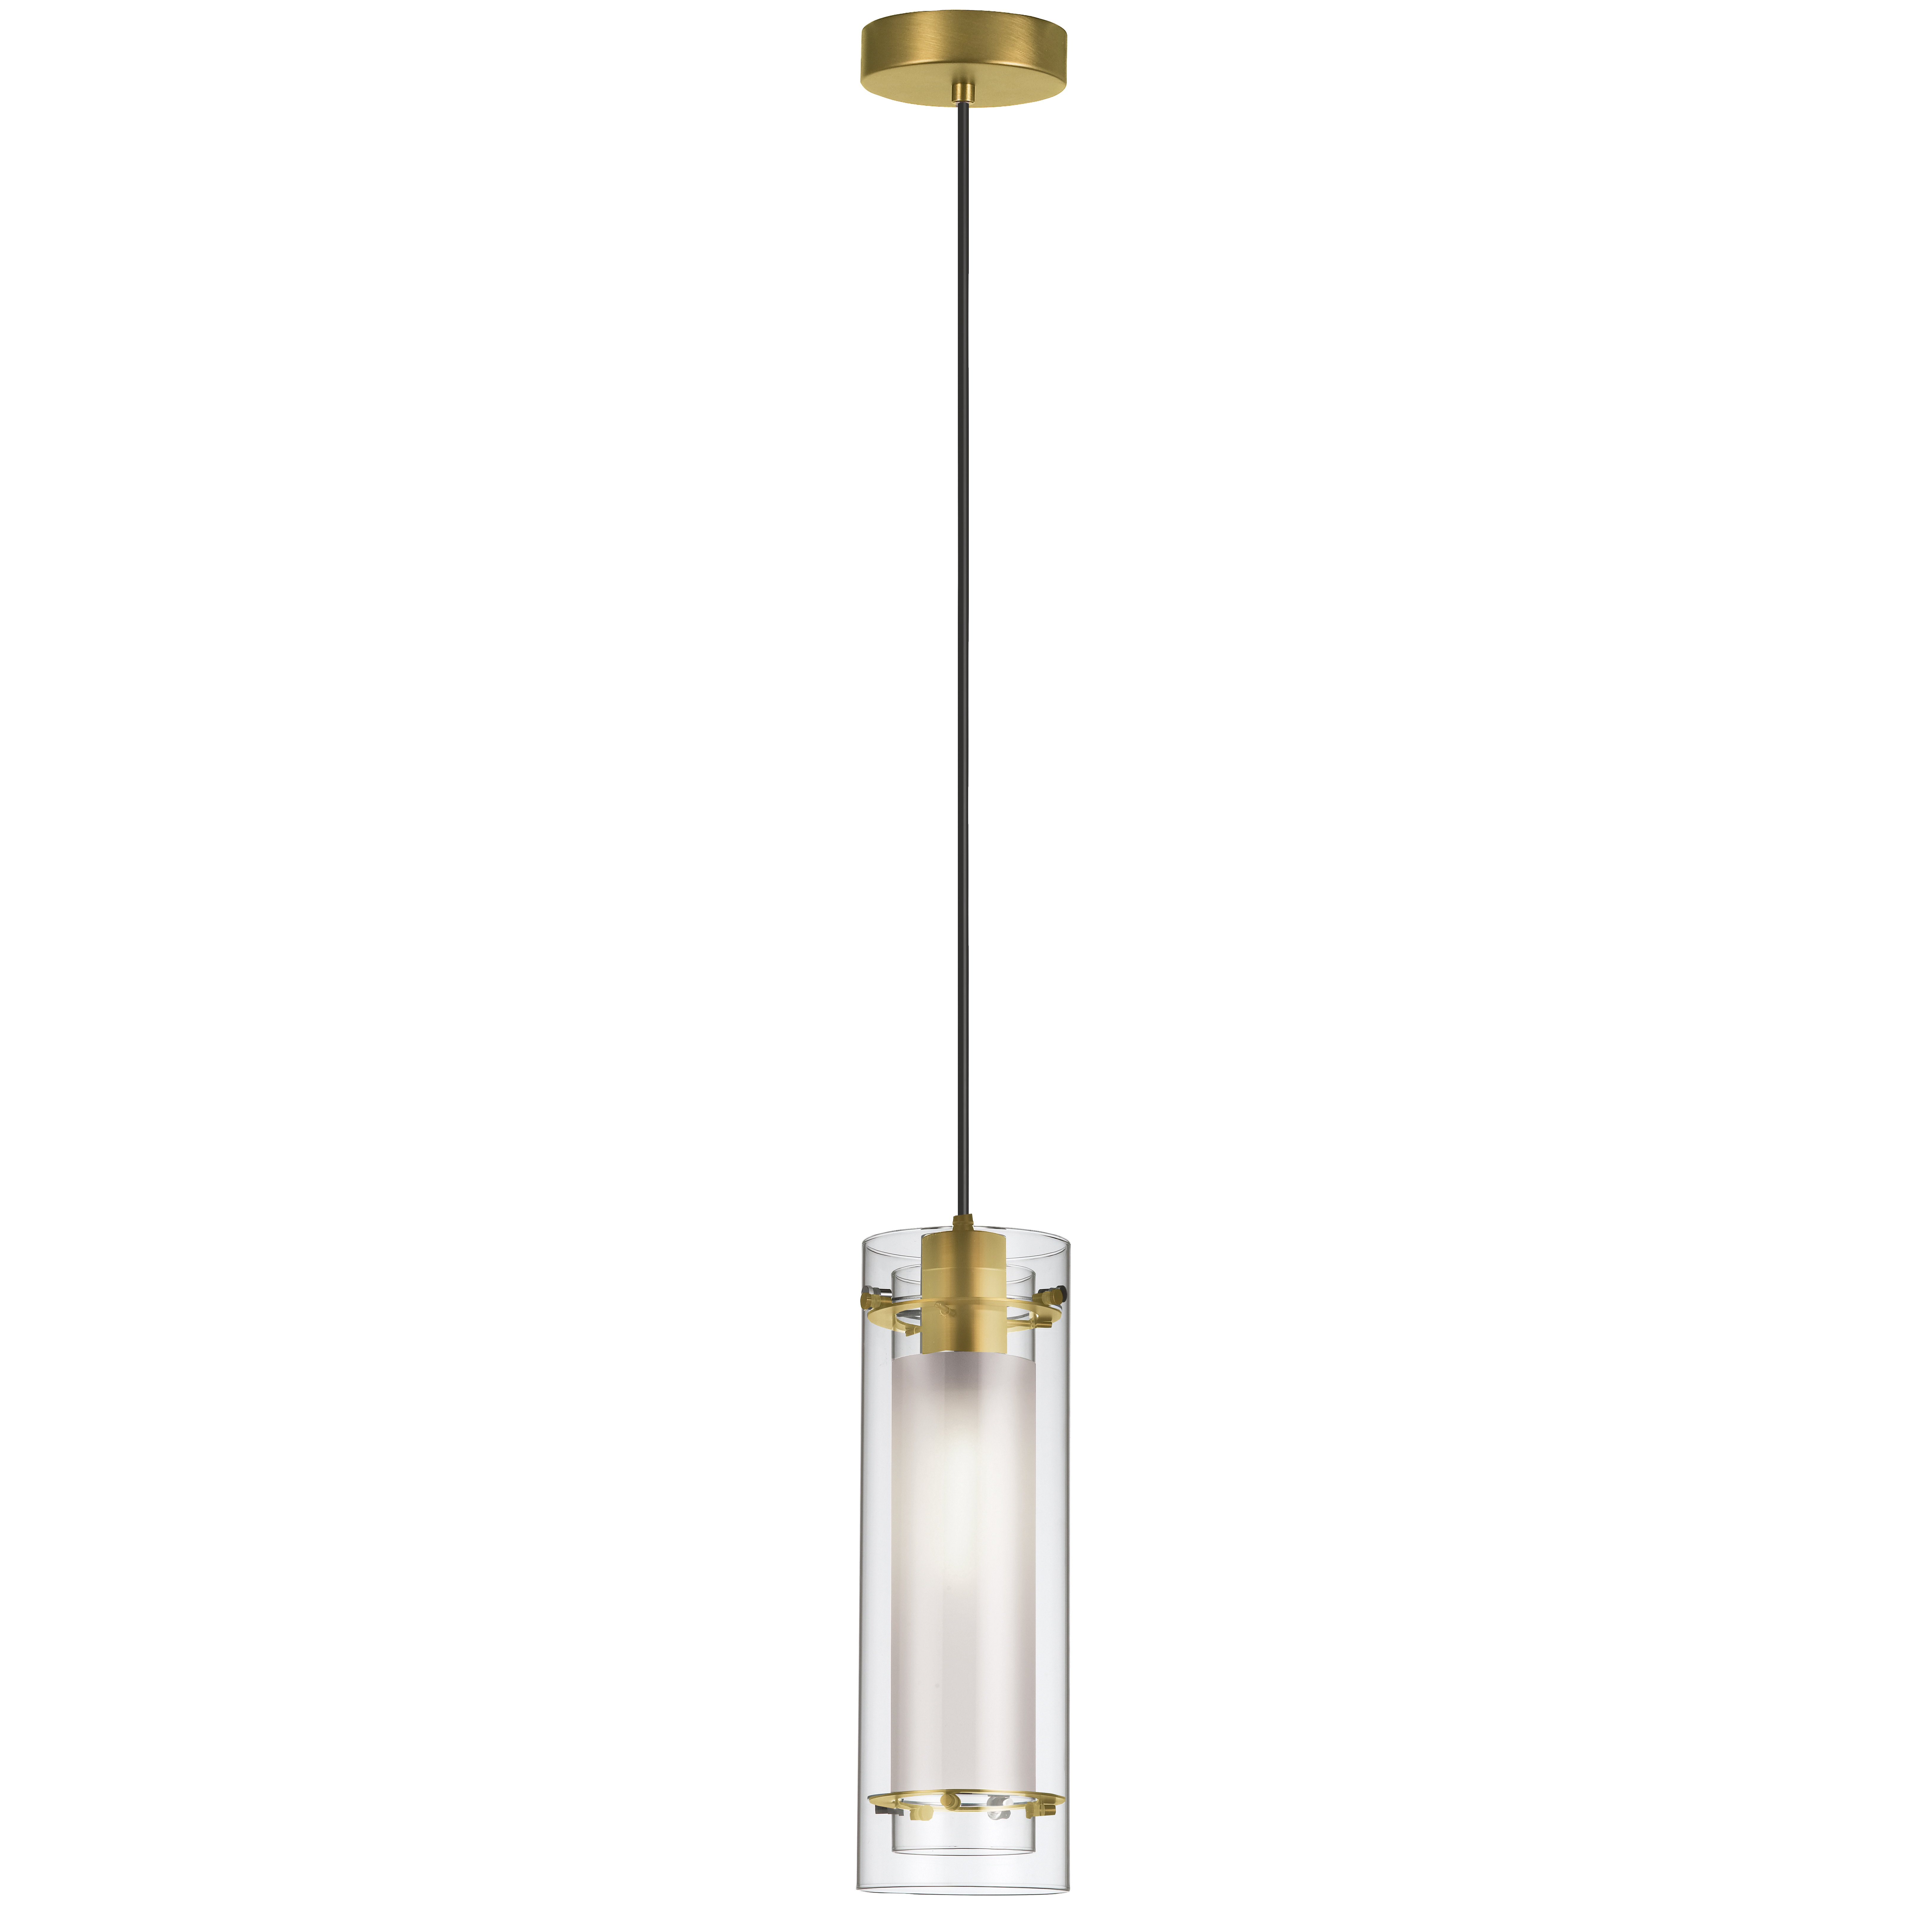 Subtle and intriguing details create a sophisticated allure in the Pasha family of lighting. The classic drop design gets a modern sheen, with sleek lines and chic contrasts. The metal drop frame is discrete, and comes in your choice of finish. A frosted glass cylinder set inside a slightly larger clear glass housing create a multi-dimensional look, and an understated gleam. Pasha lighting will satisfy discerning tastes, and enhance the clean, smooth surfaces of a kitchen or bar, and add a pop of artistry to the foyer.